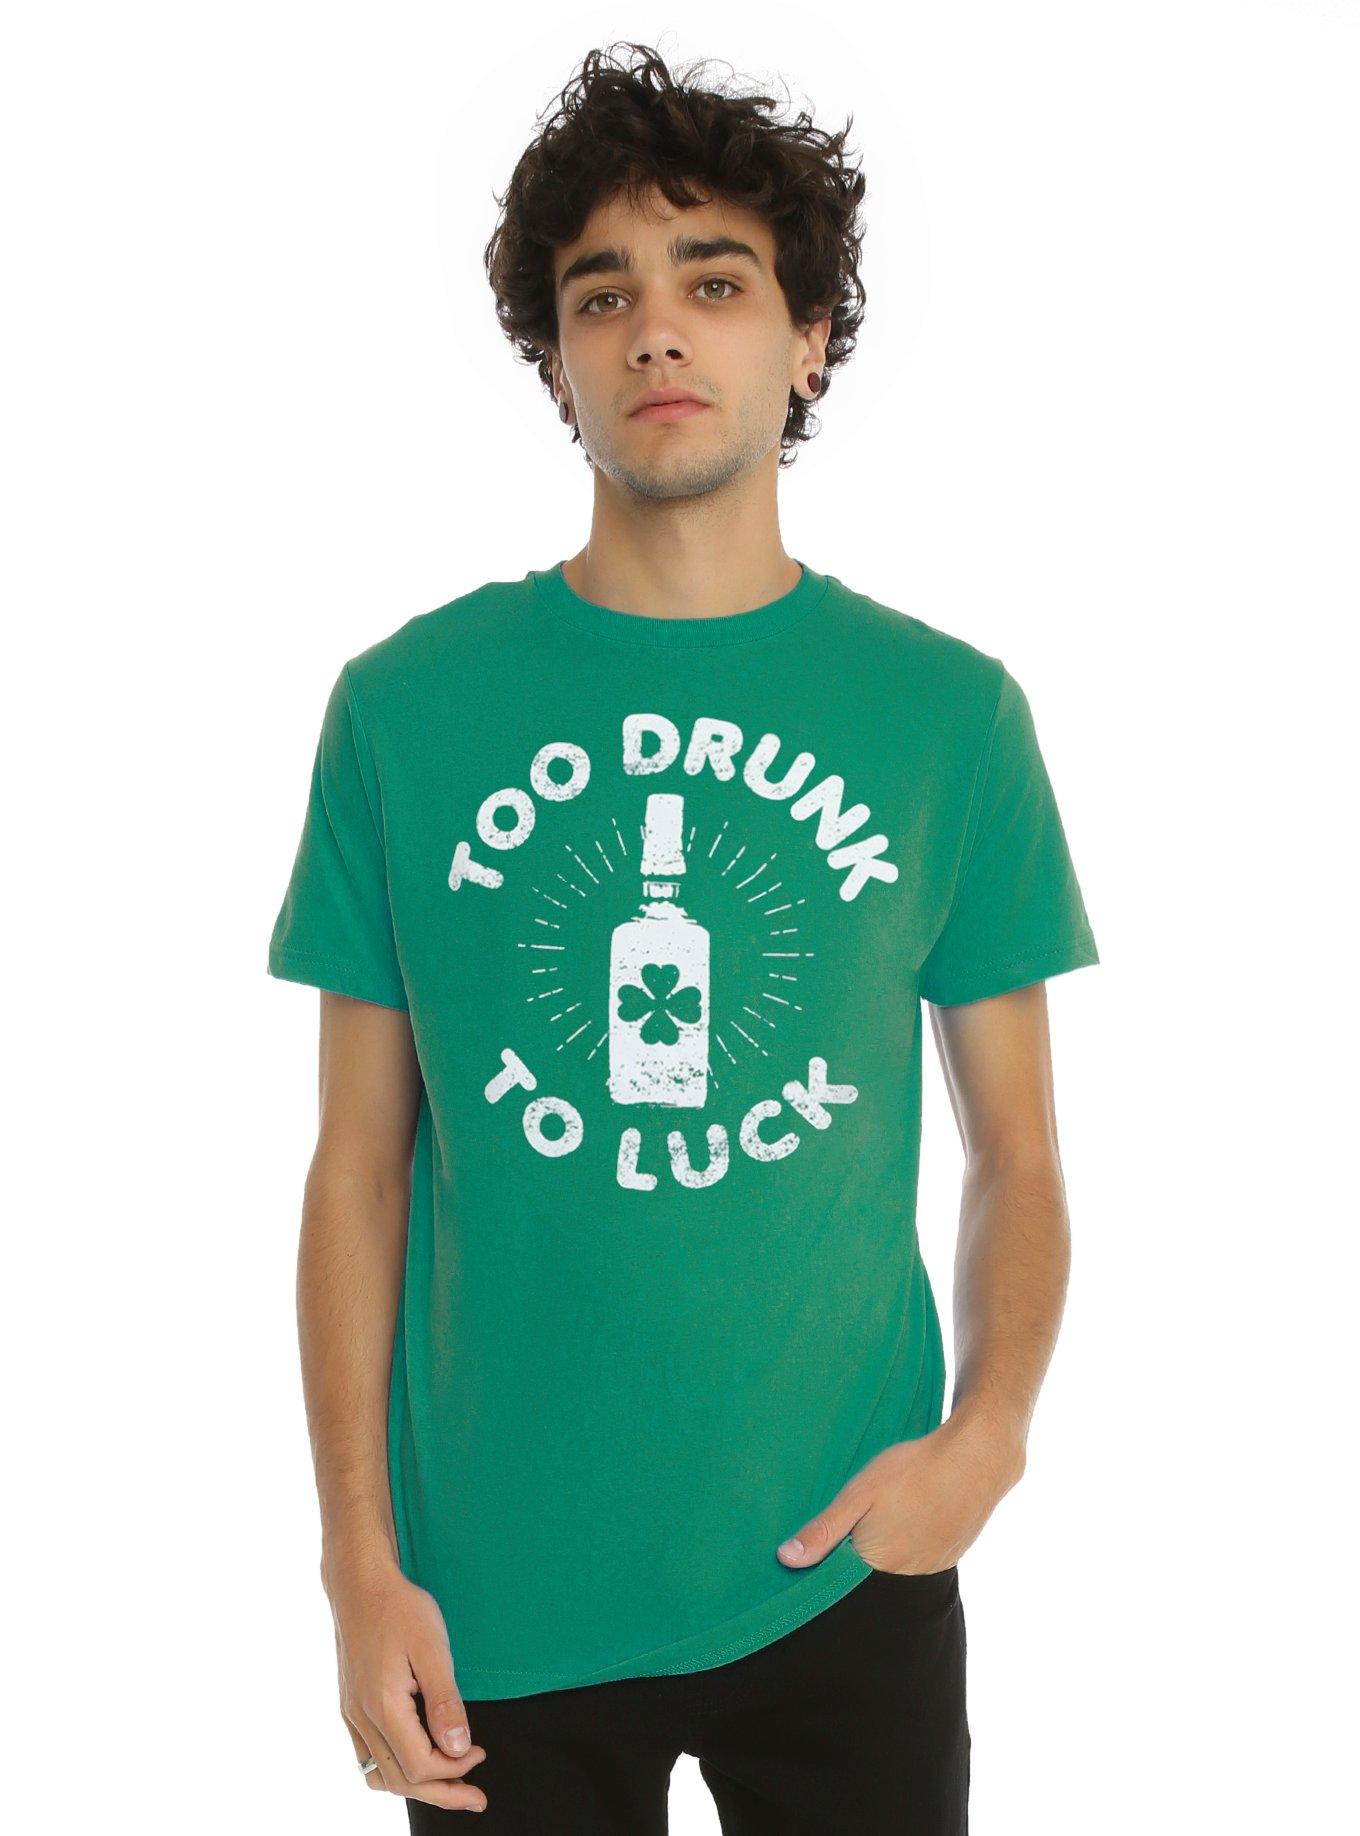 Too Drunk To Luck T-Shirt, GREEN, hi-res